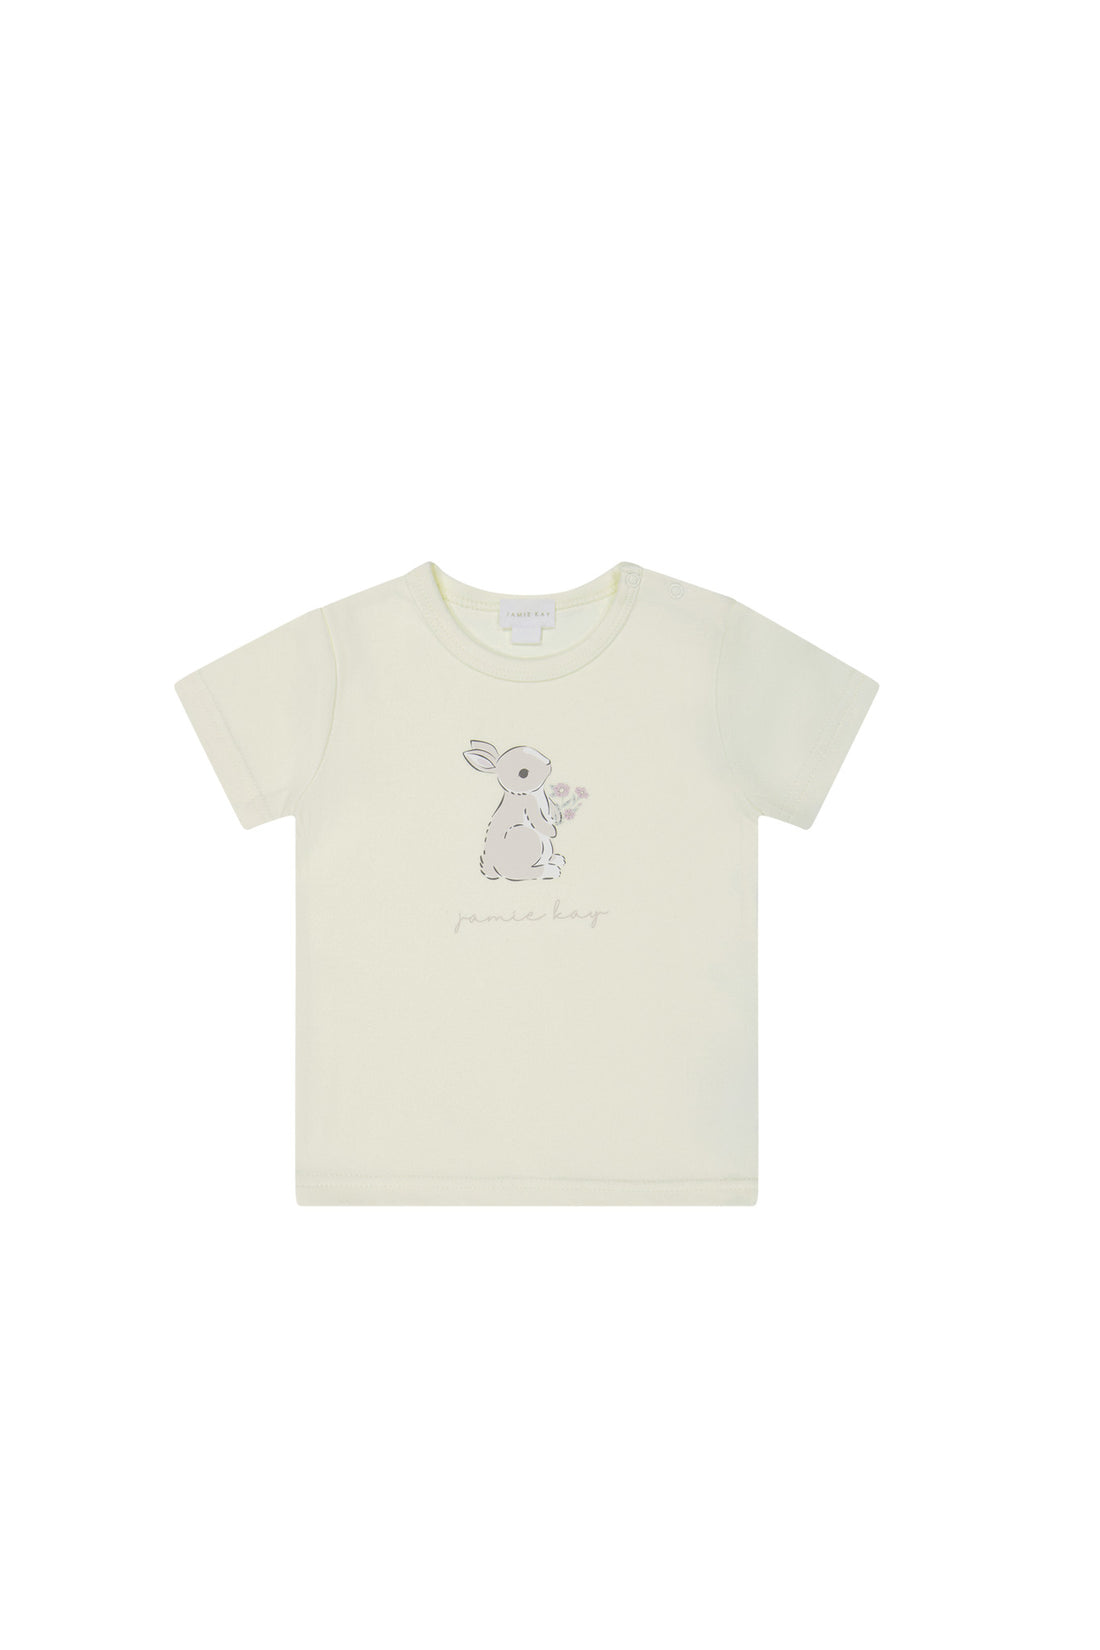 Pima Cotton Aude Oversized Tee - Parchment Childrens Top from Jamie Kay NZ